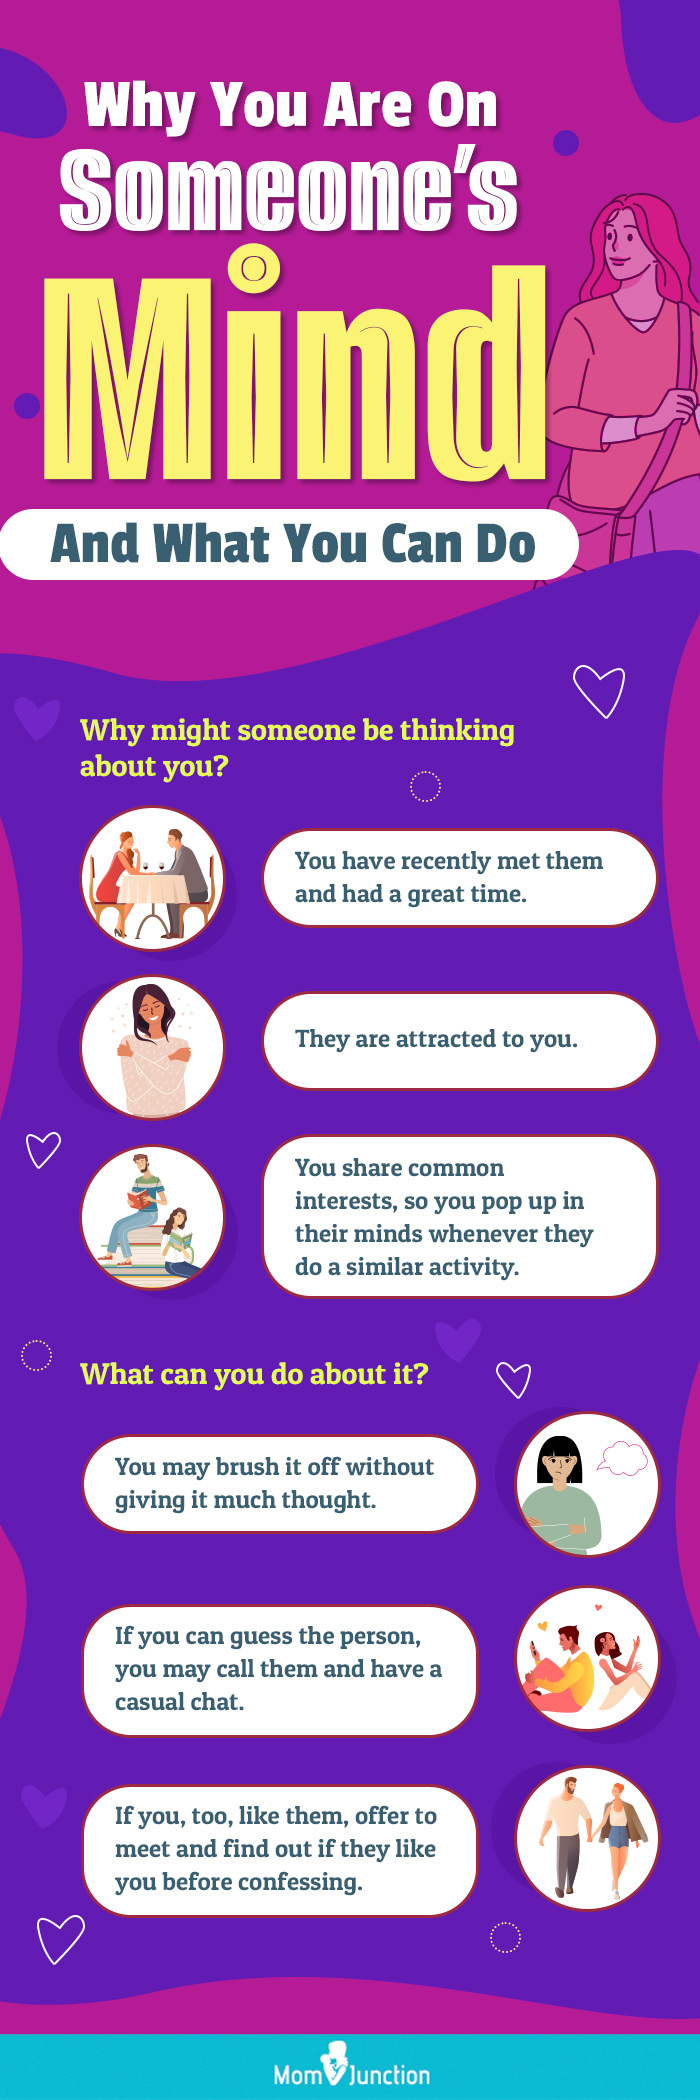 reasons they may be thinking about you [infographic]